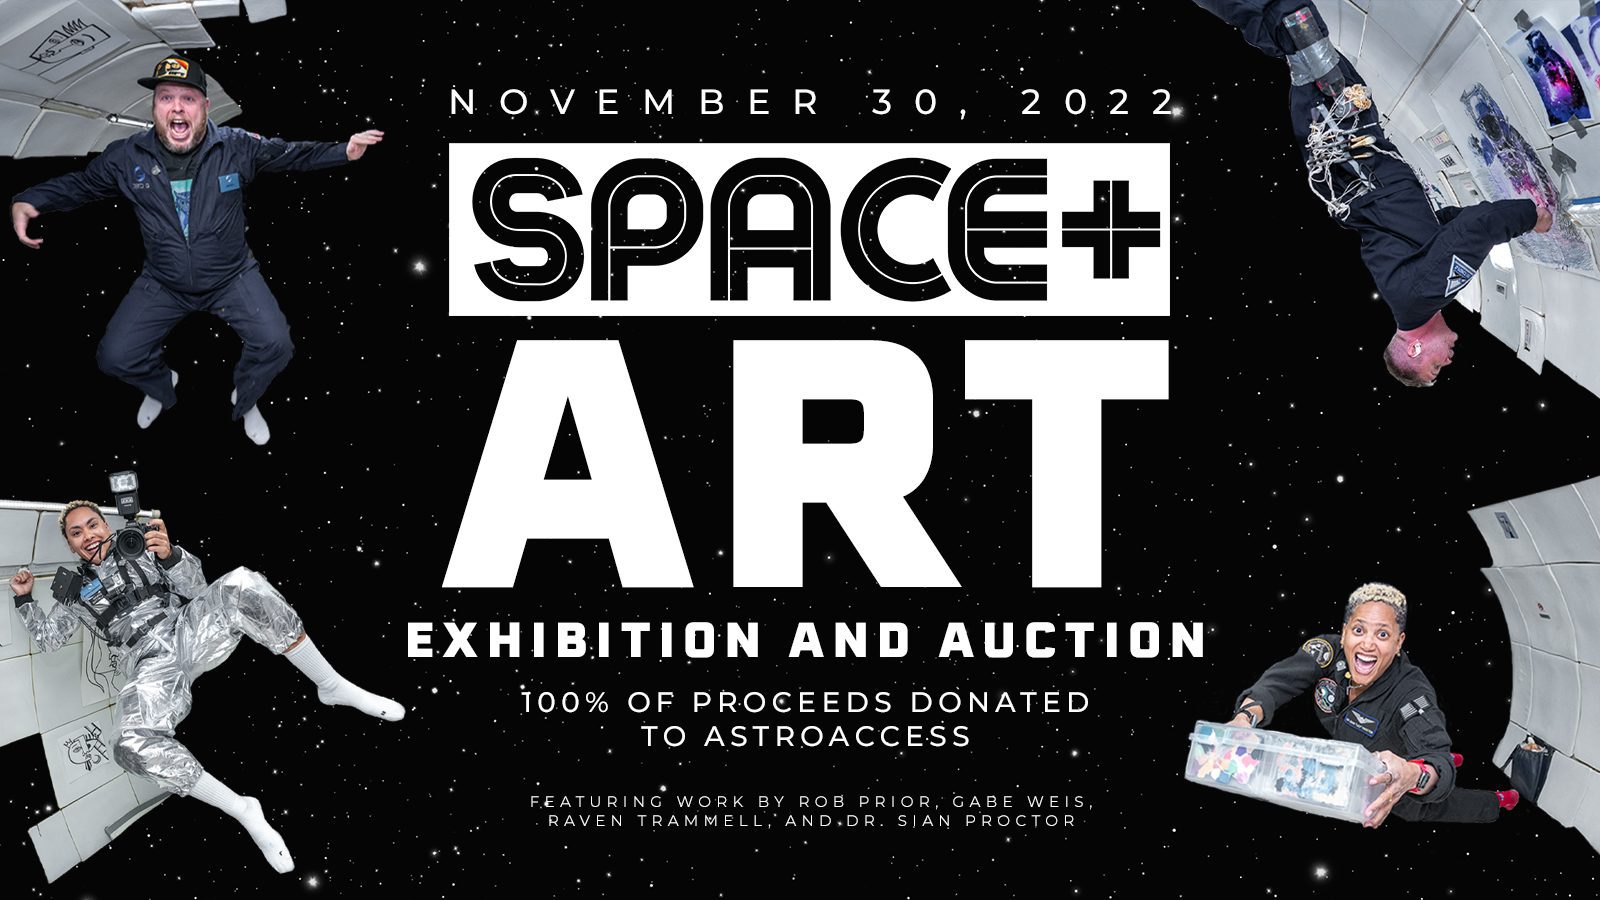 Uplift Aerospace Holds Exclusive Space+Art Auction to Raise Funds for Non-Profit AstroAccess